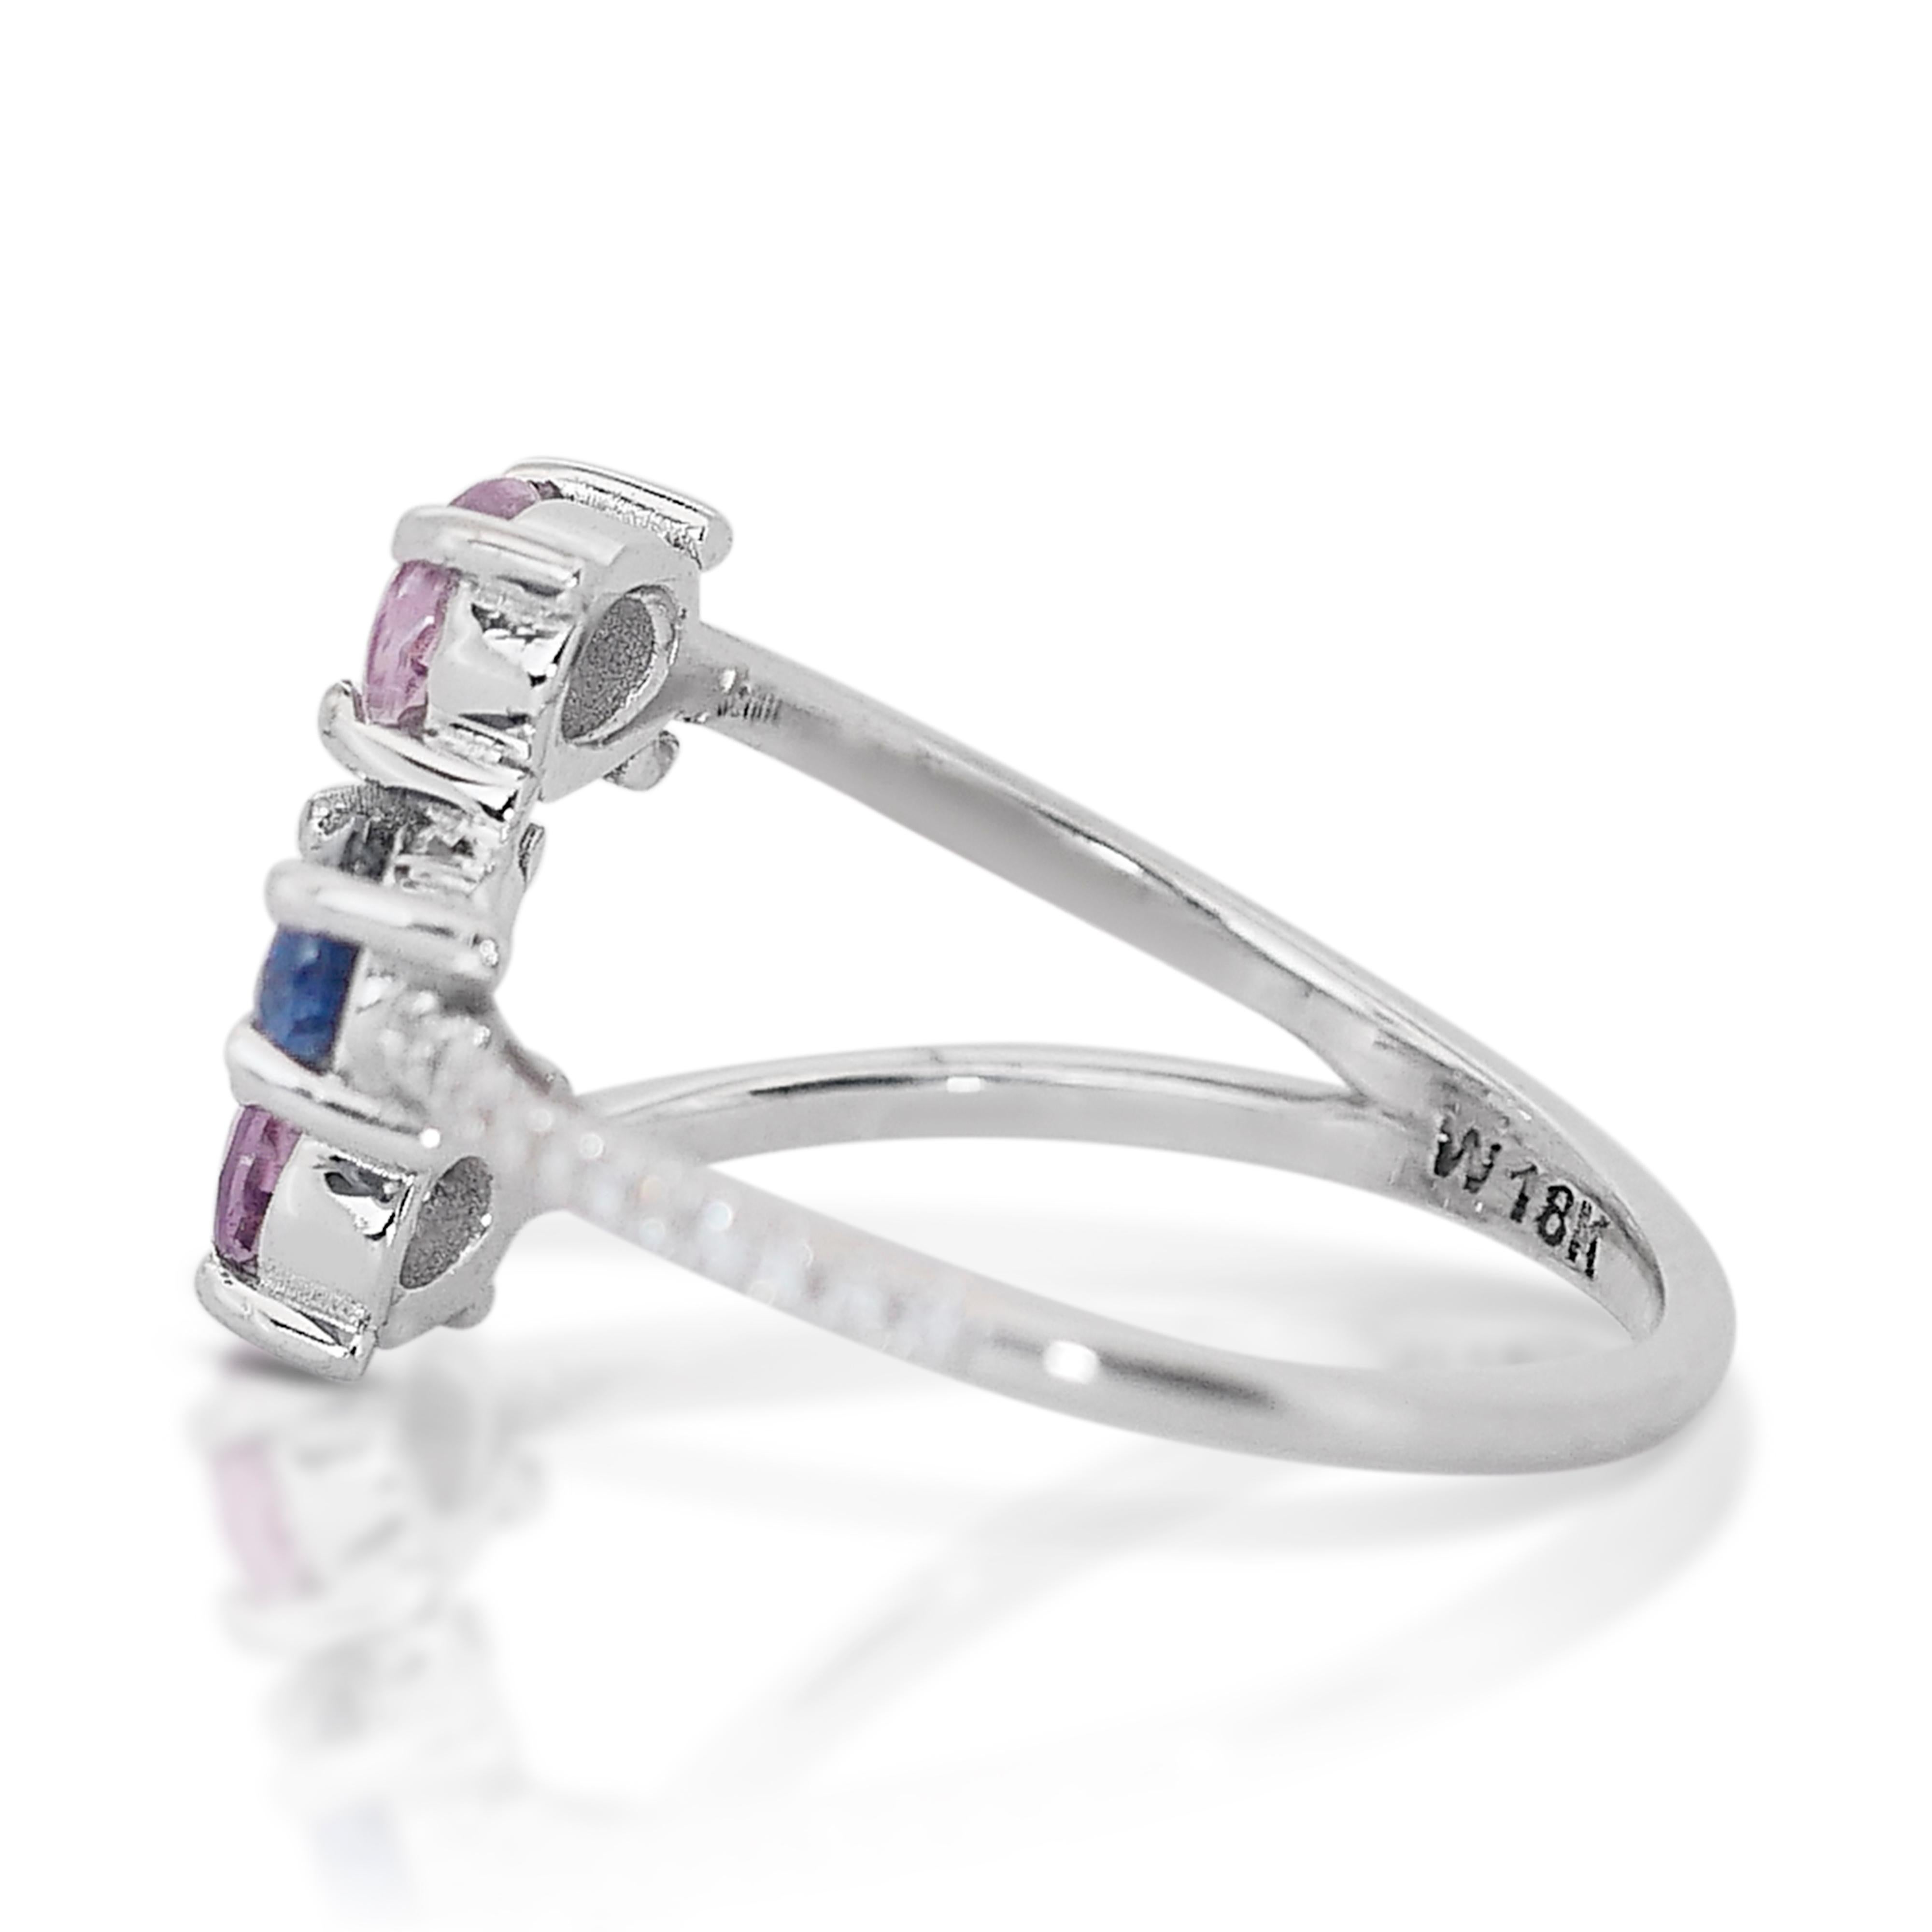 Stylish 1.17ct Sapphires and Diamonds Fancy-Colored Ring in 18k White Gold - IGI Certified

Discover the enchanting harmony of colors with this fancy-colored ring, a delicate fusion of elegance and vibrant hues. This exquisite piece features a